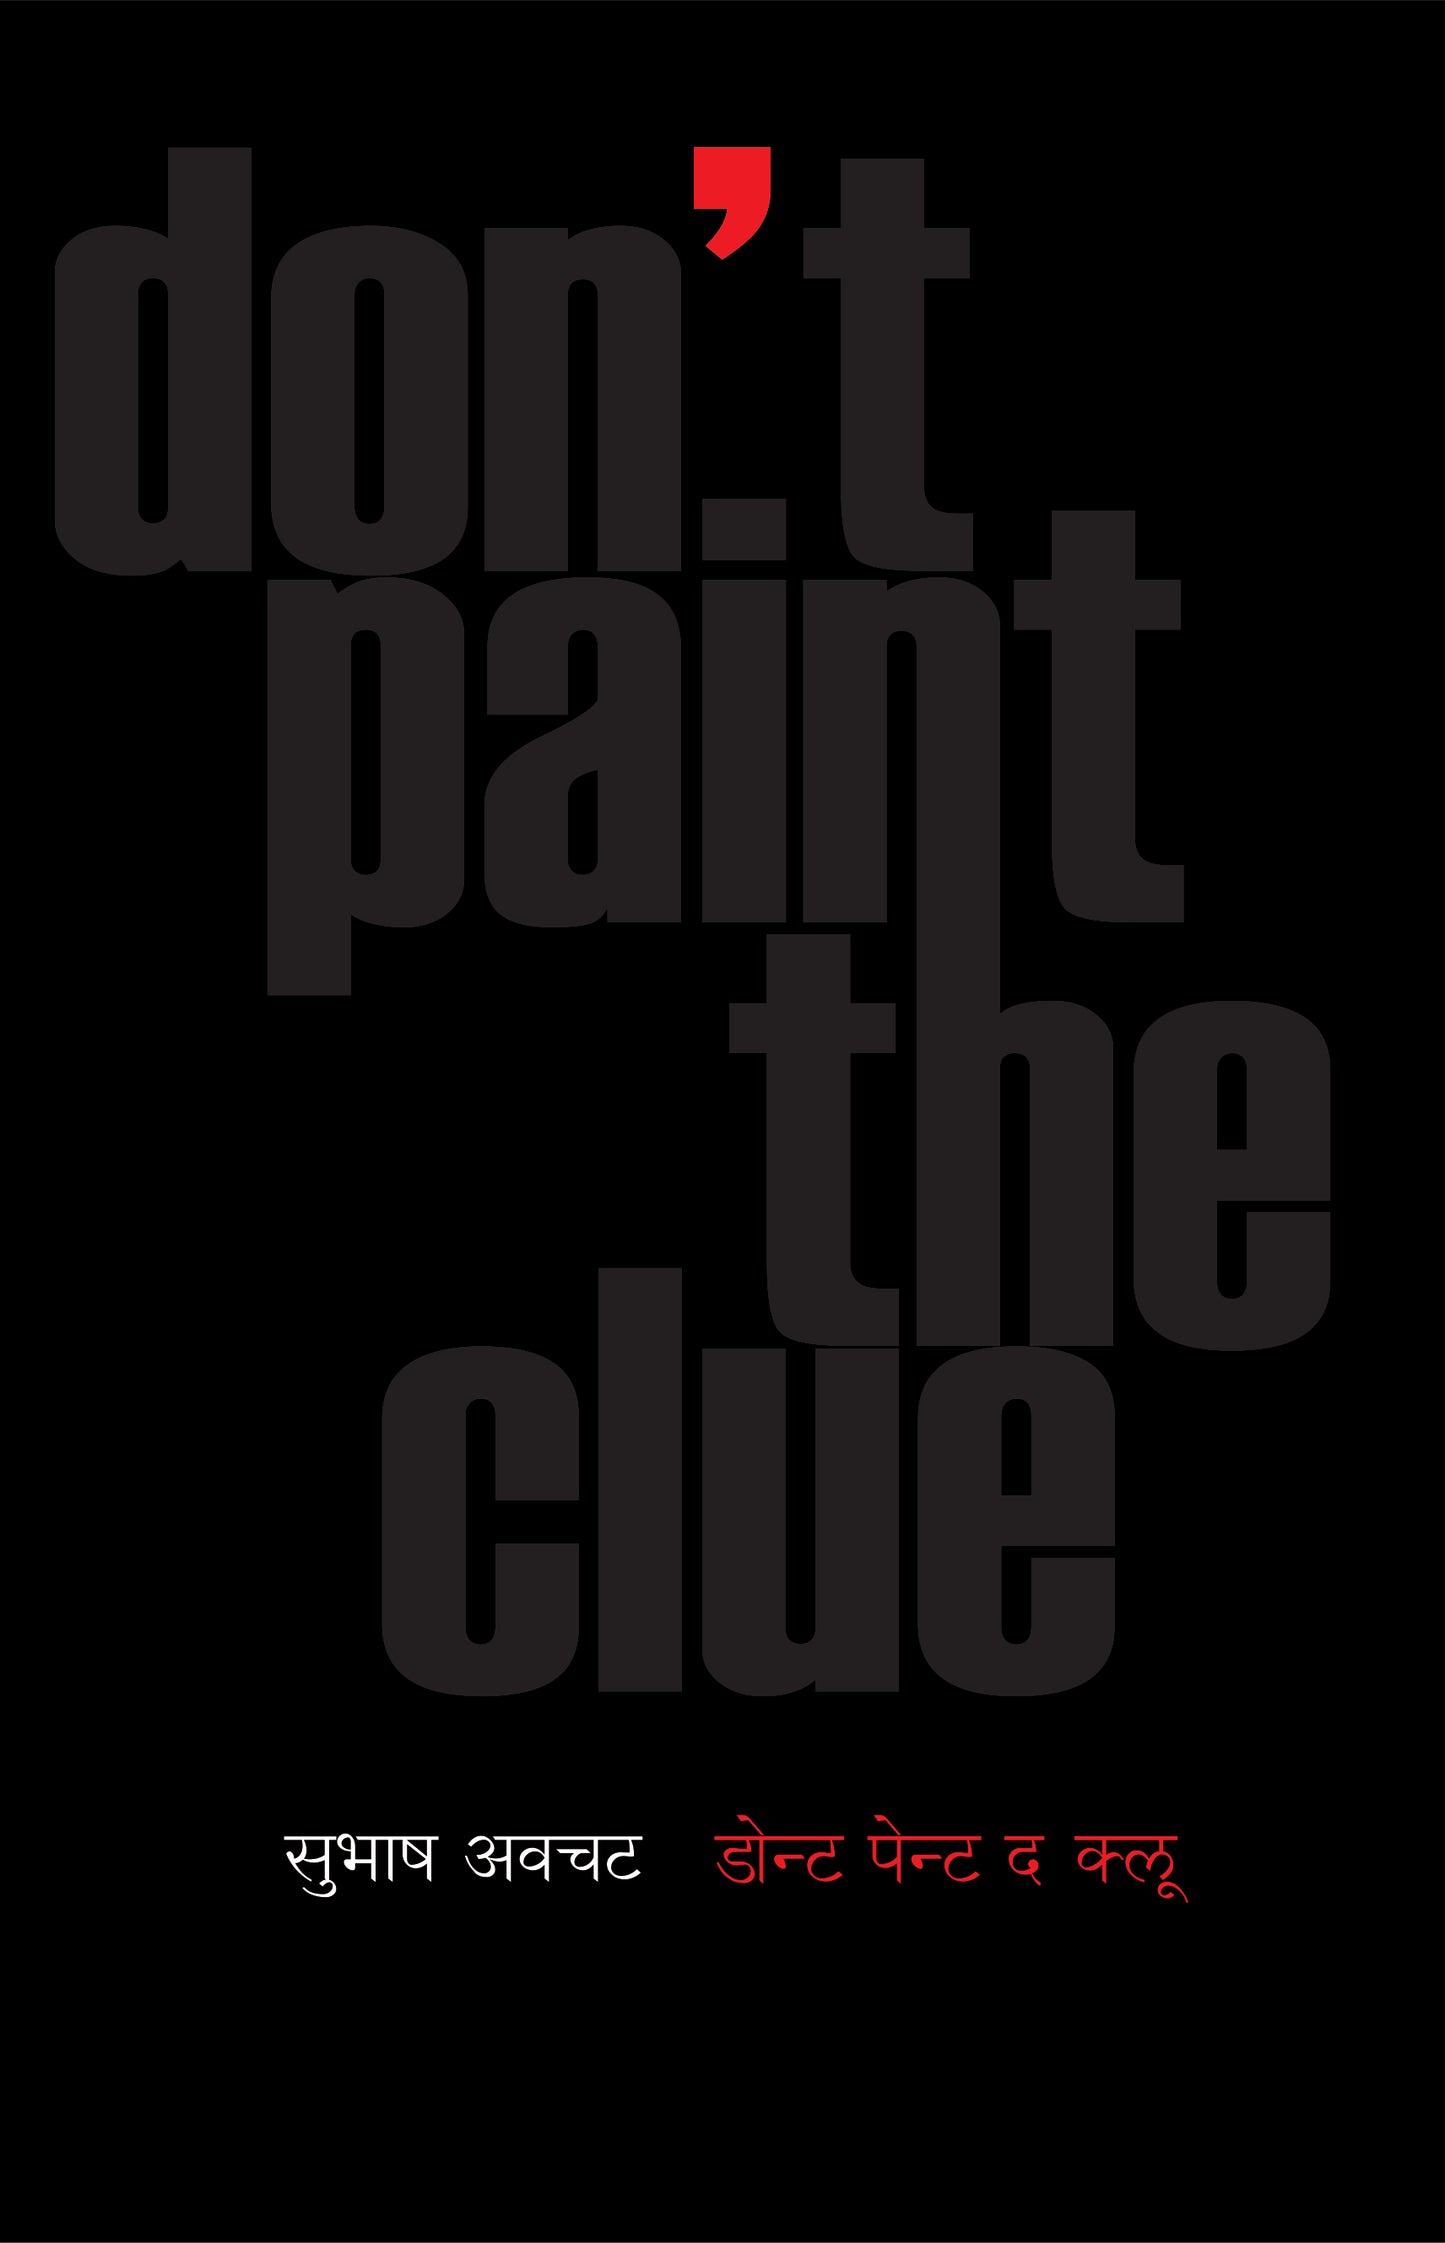 Dont Paint The Clue by AVACHAT SUBHASH